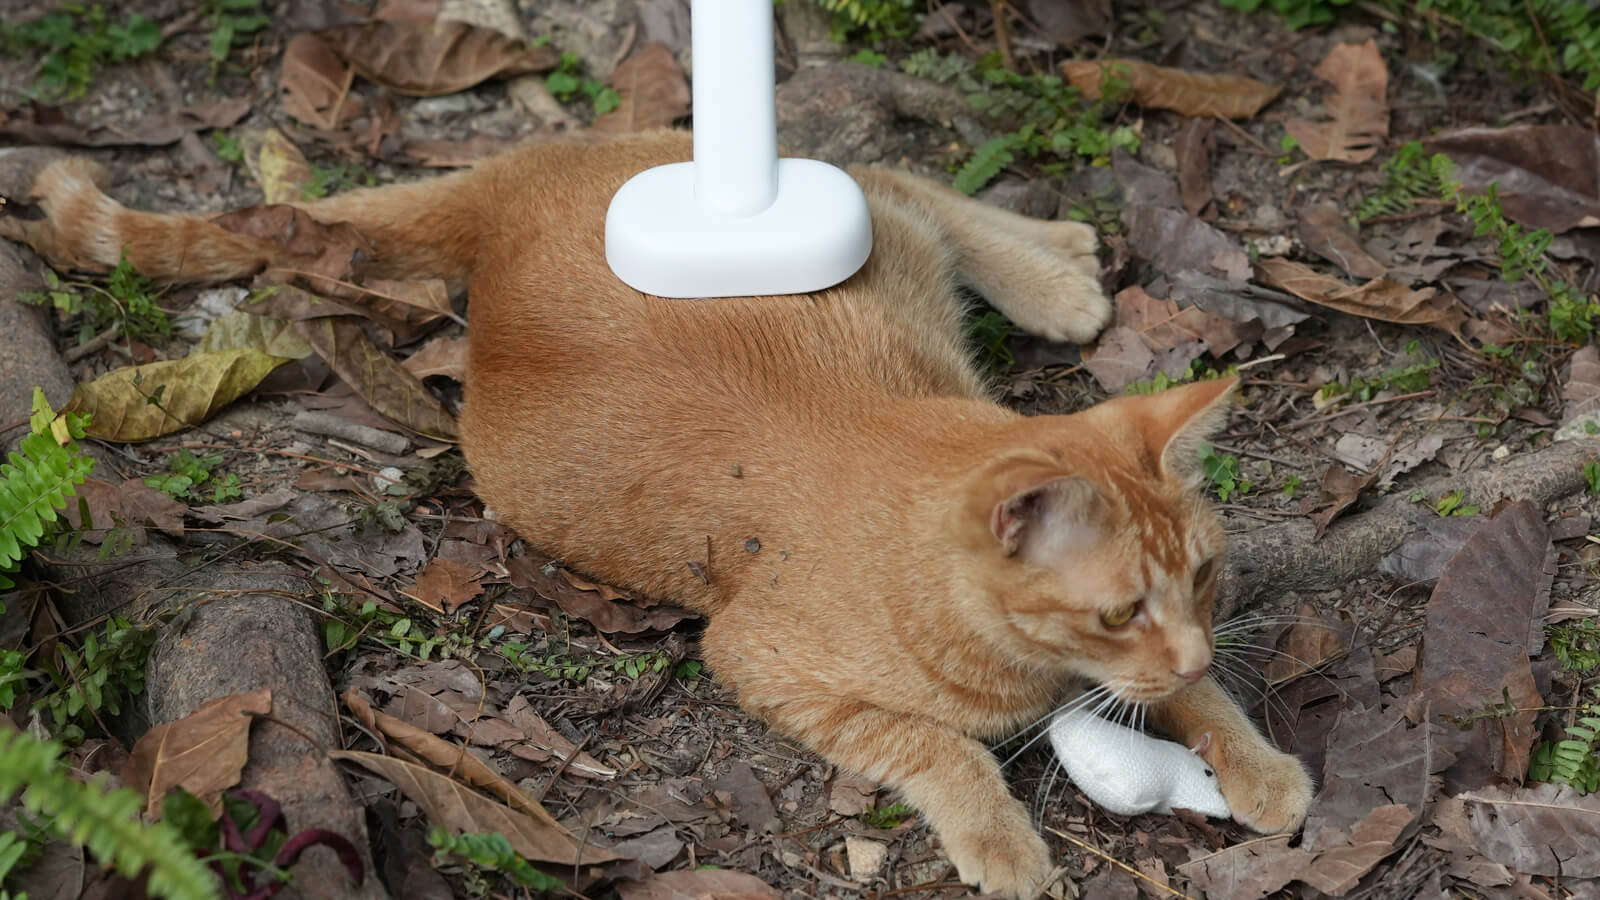 clean outdoor cats play get lumpy and dirty hair